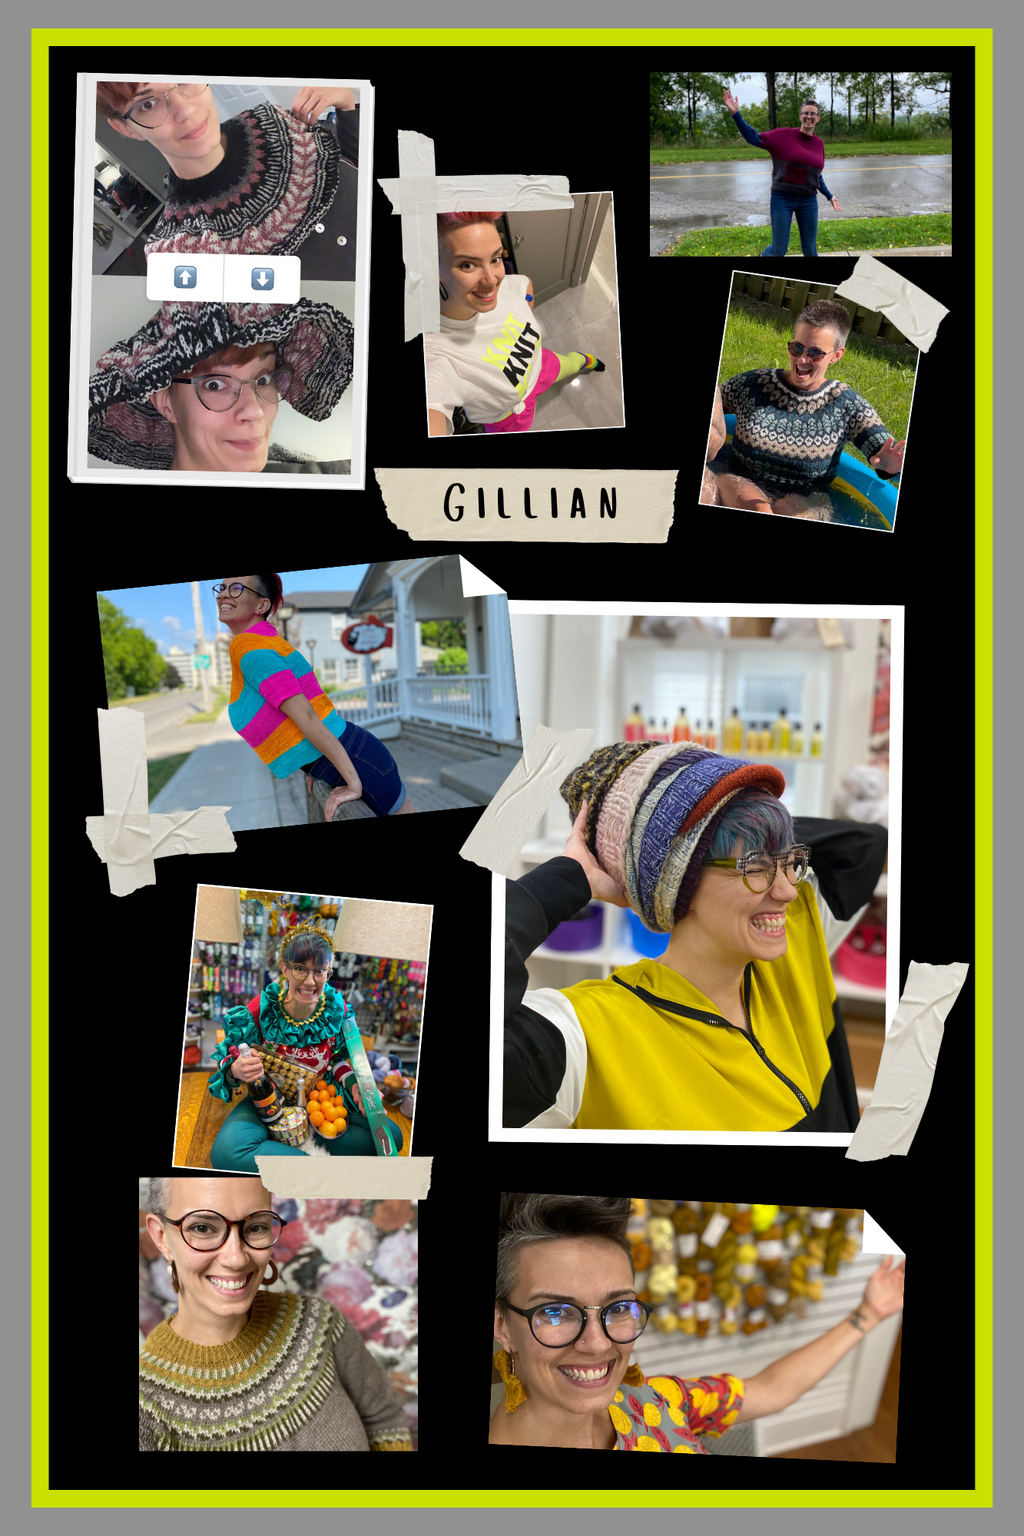 Get to Know our Team Members: Gillian